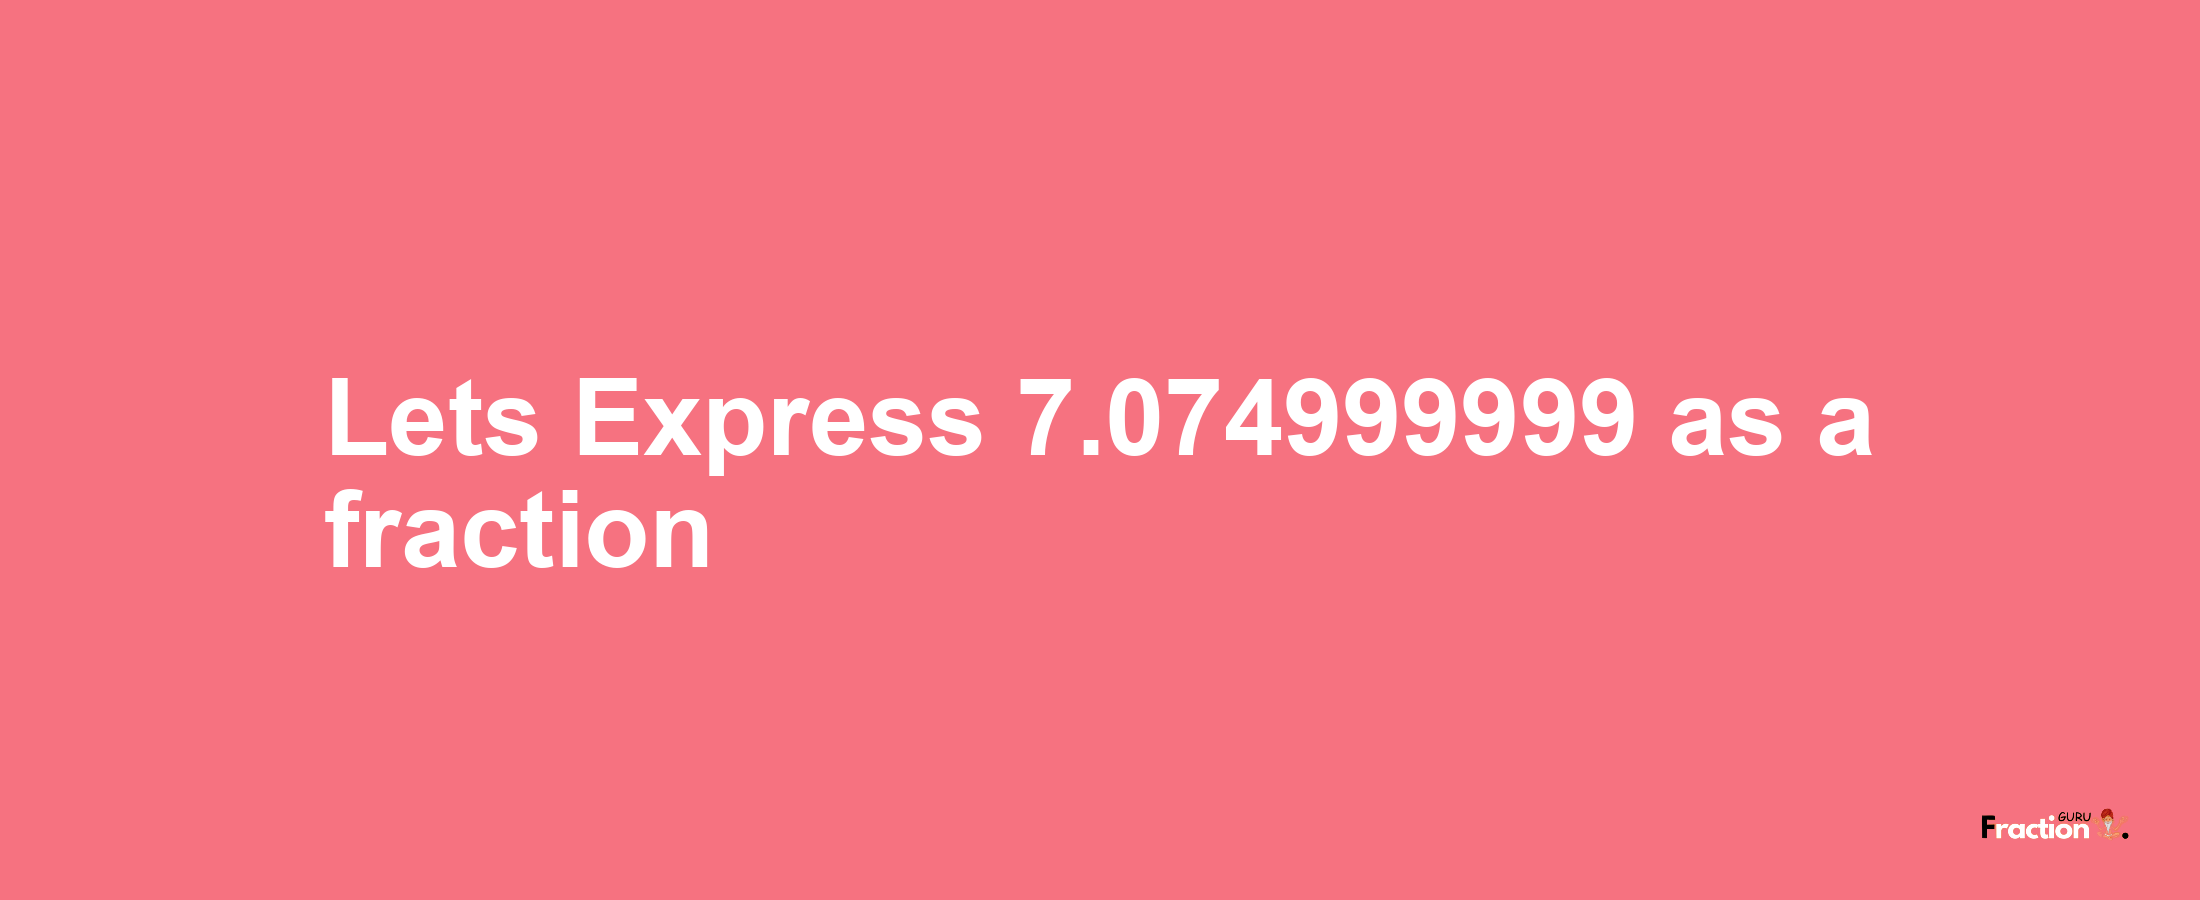 Lets Express 7.074999999 as afraction